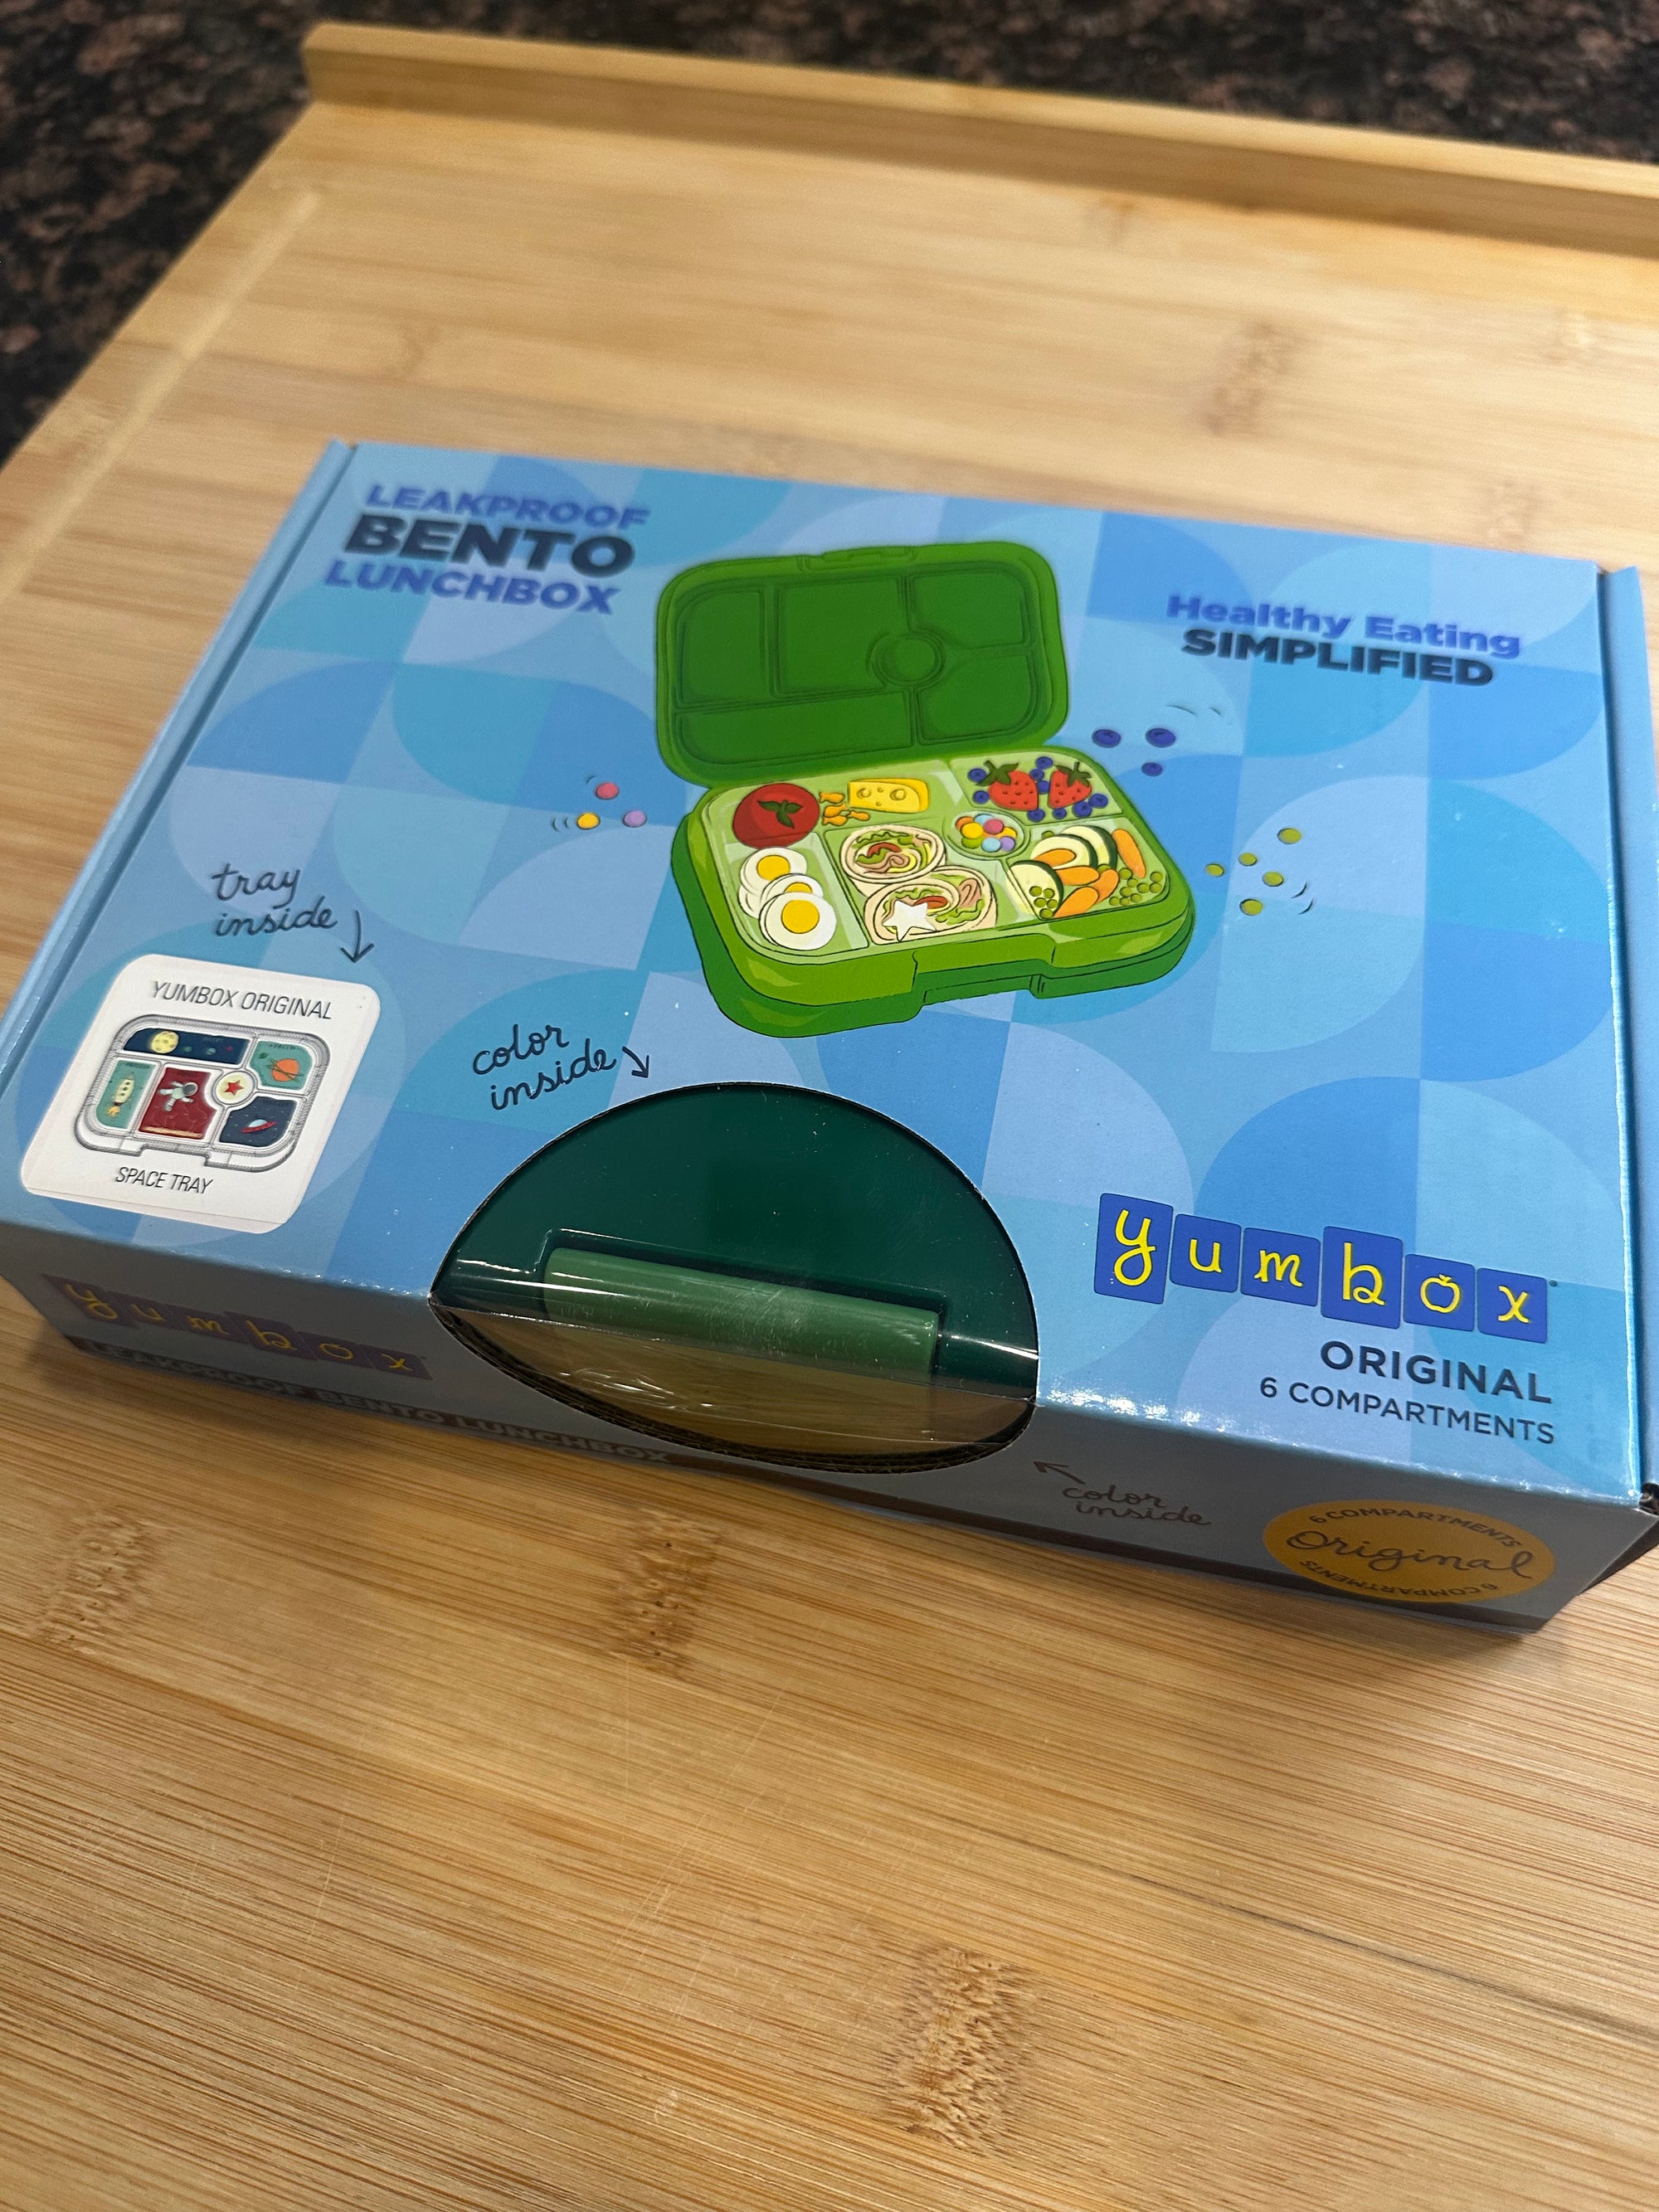 Leakproof Bento Box for Kids - Green - Erin Chase Store